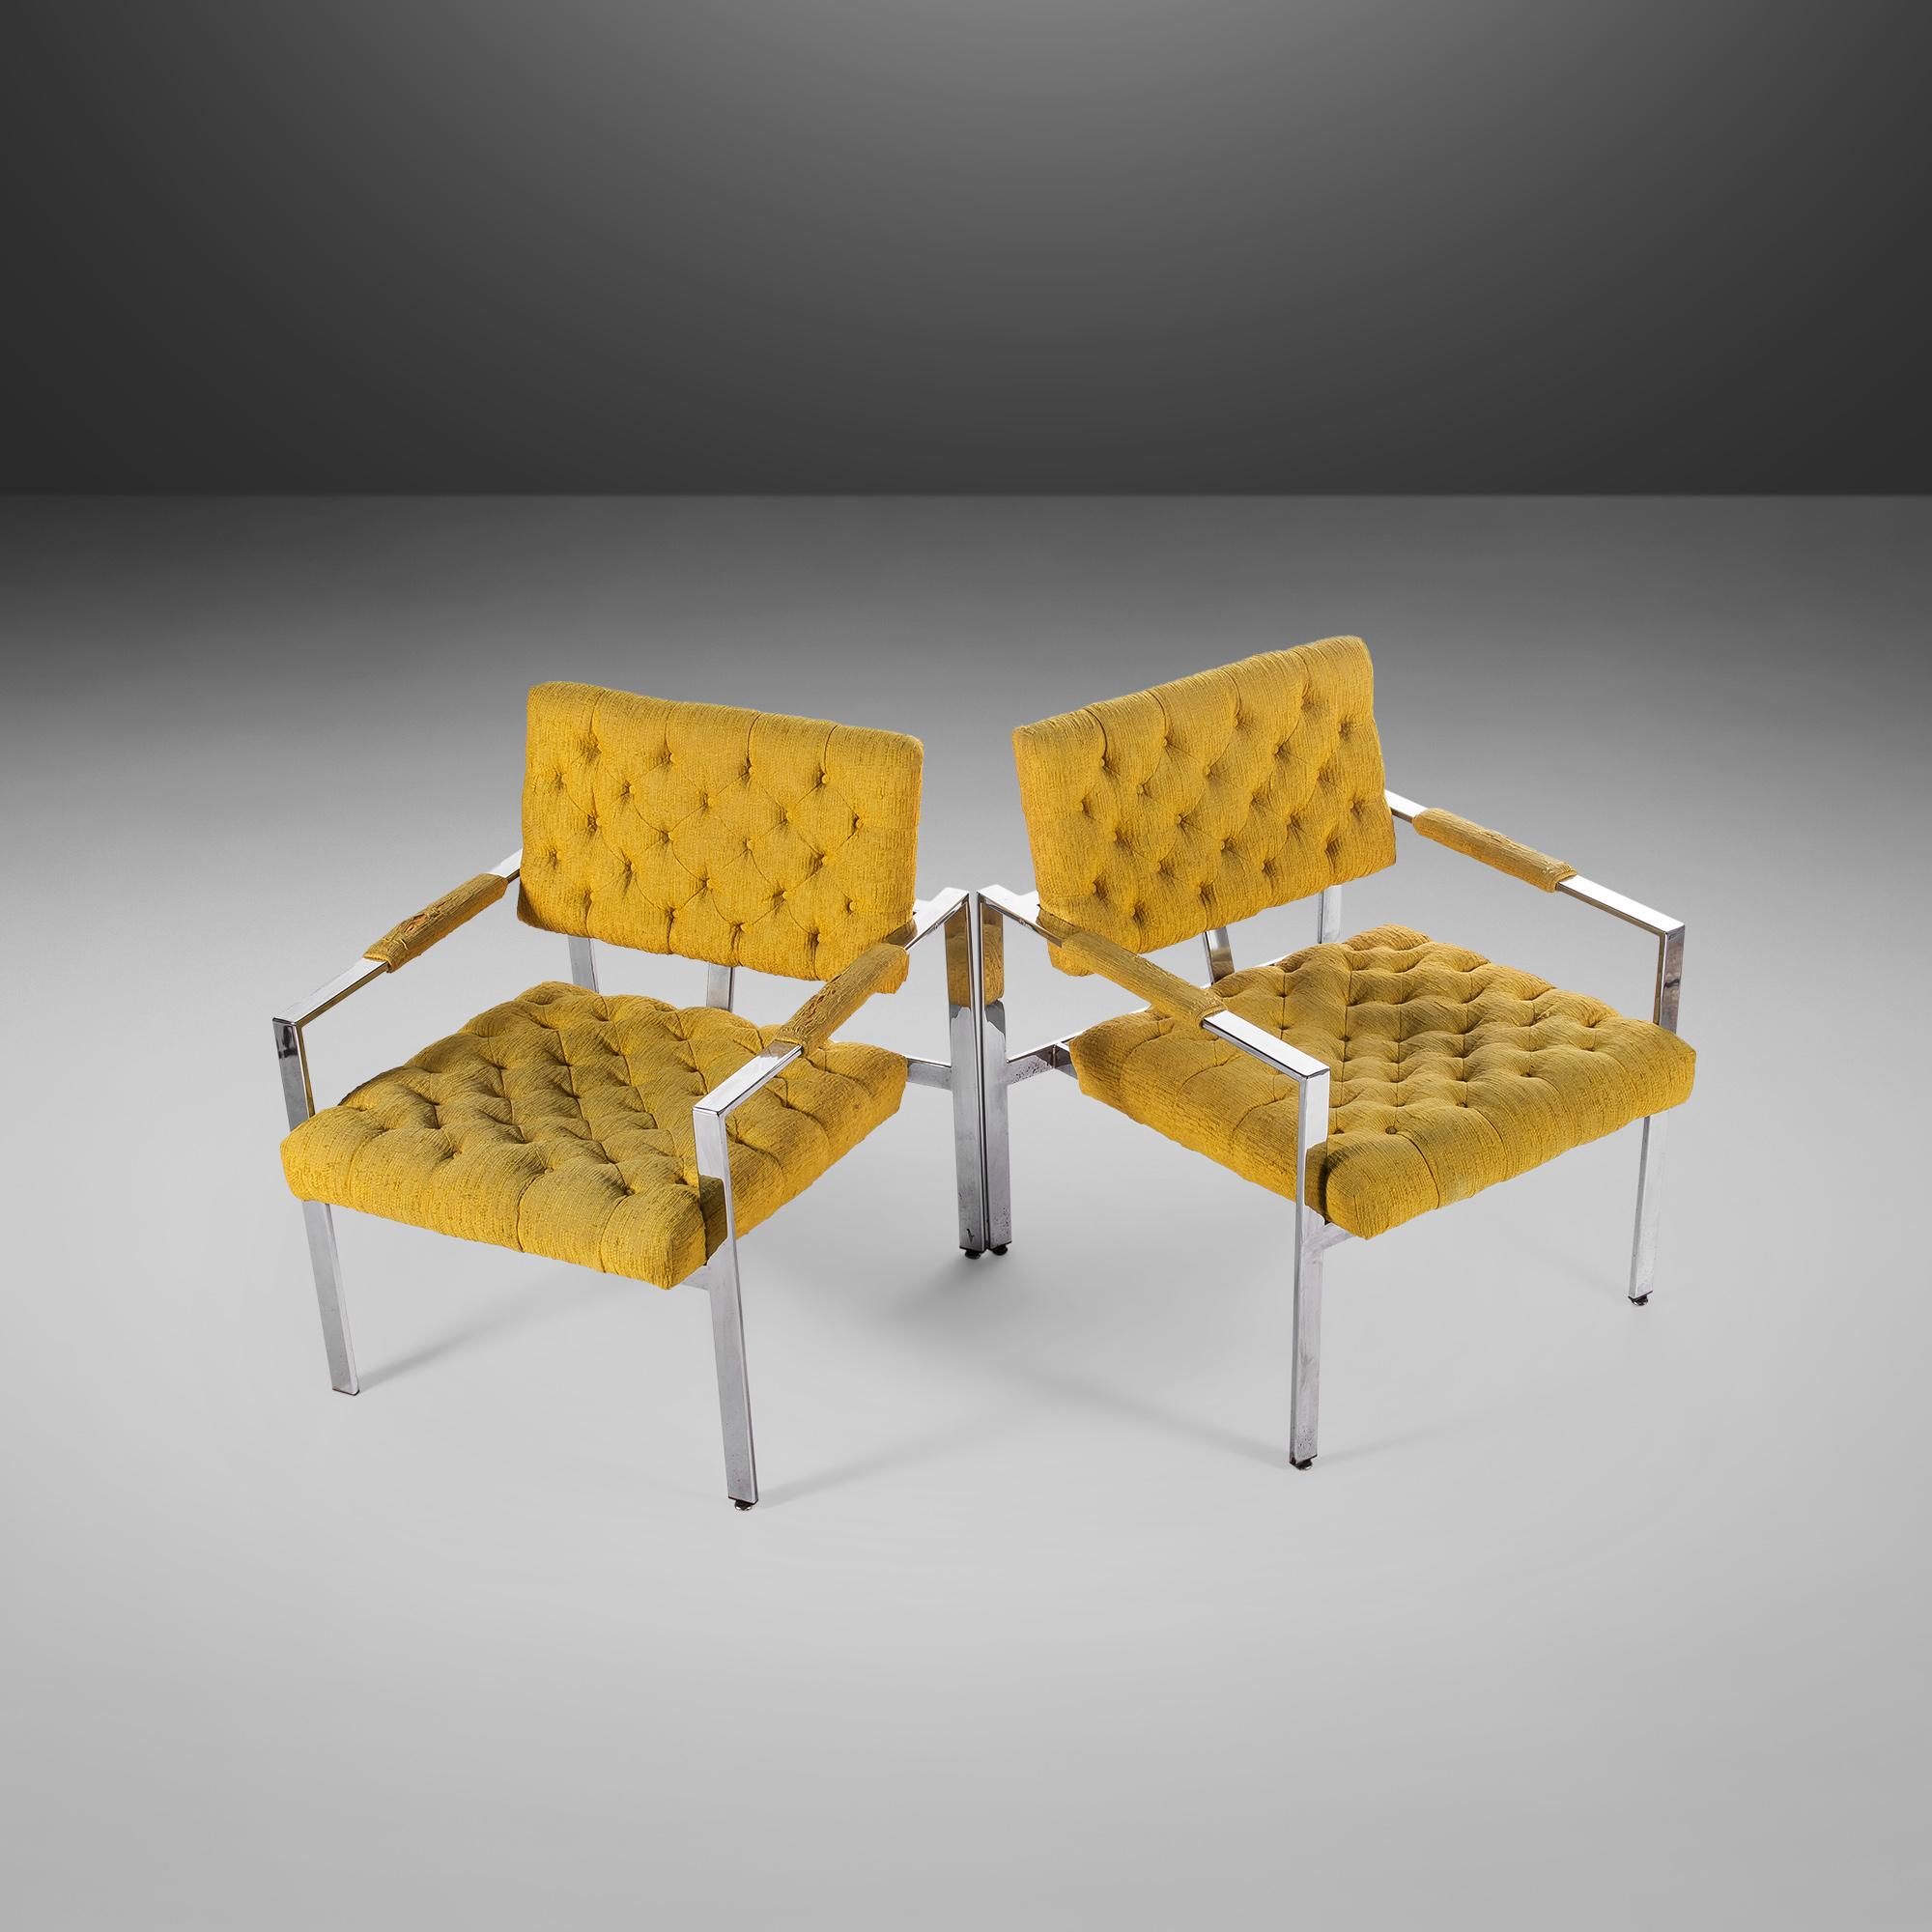 Pair of Chrome Lounge Chairs by Milo Baughman for Thayer Coggin, USA, c. 1970's In Distressed Condition For Sale In Deland, FL